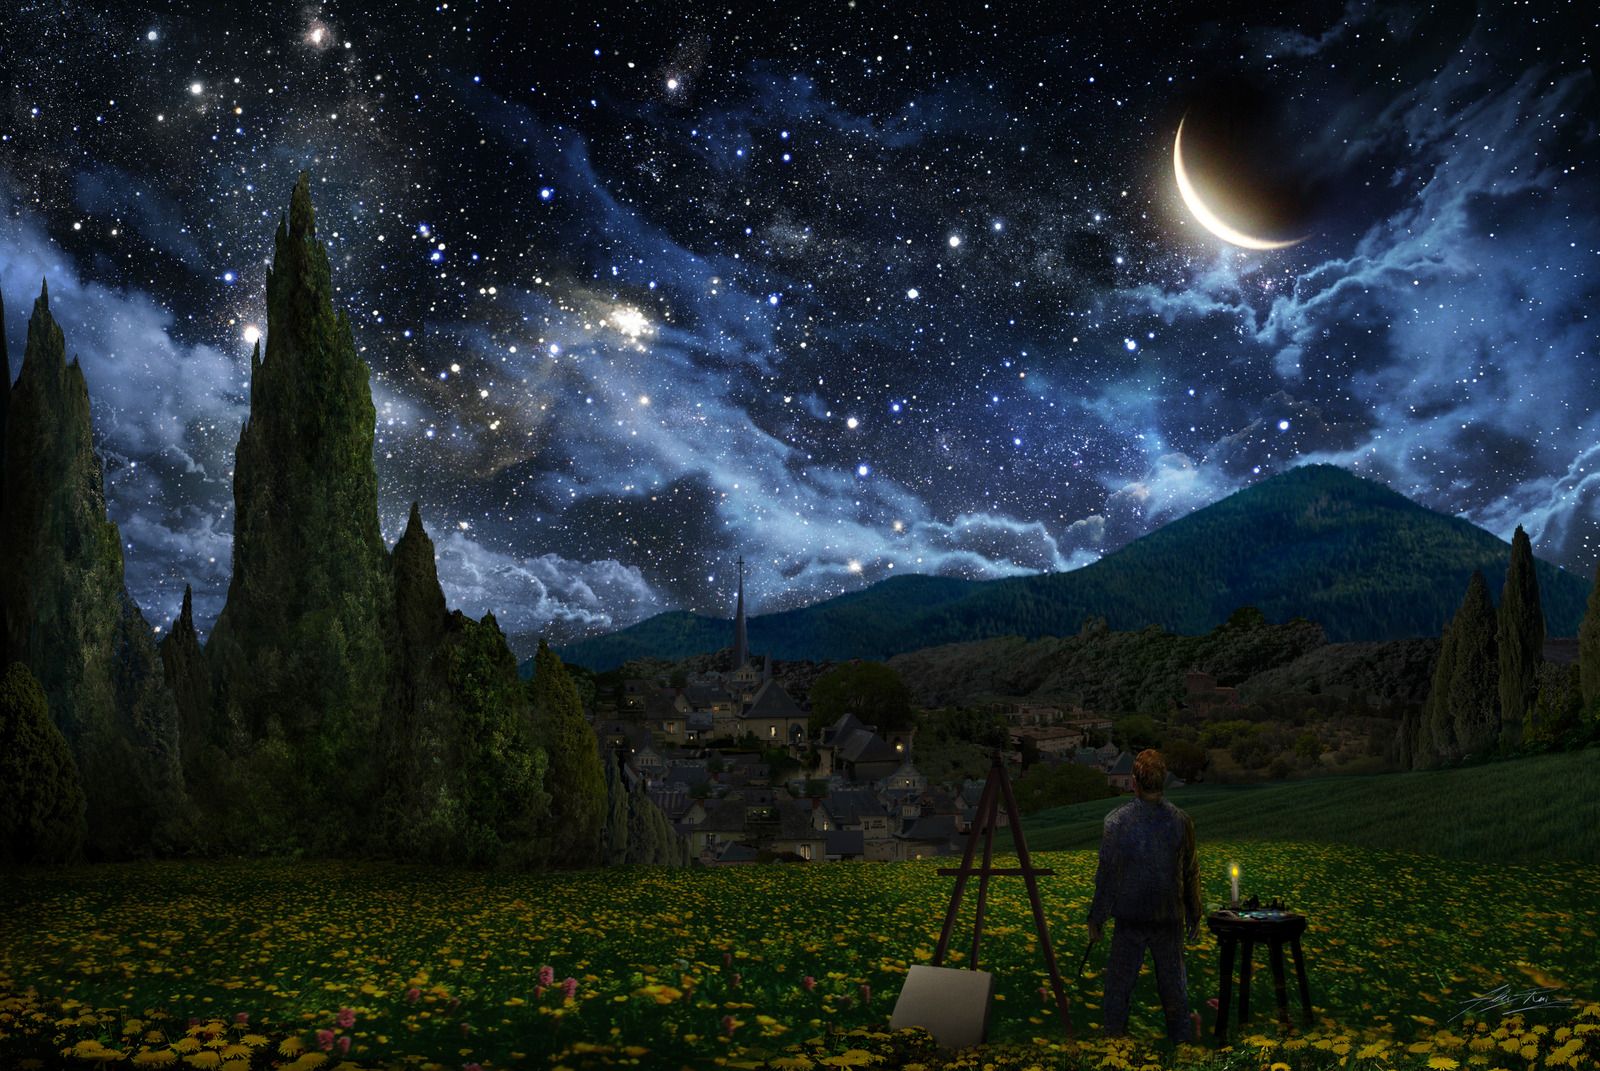 Painting of Van Gogh's Perspective for Starry Night